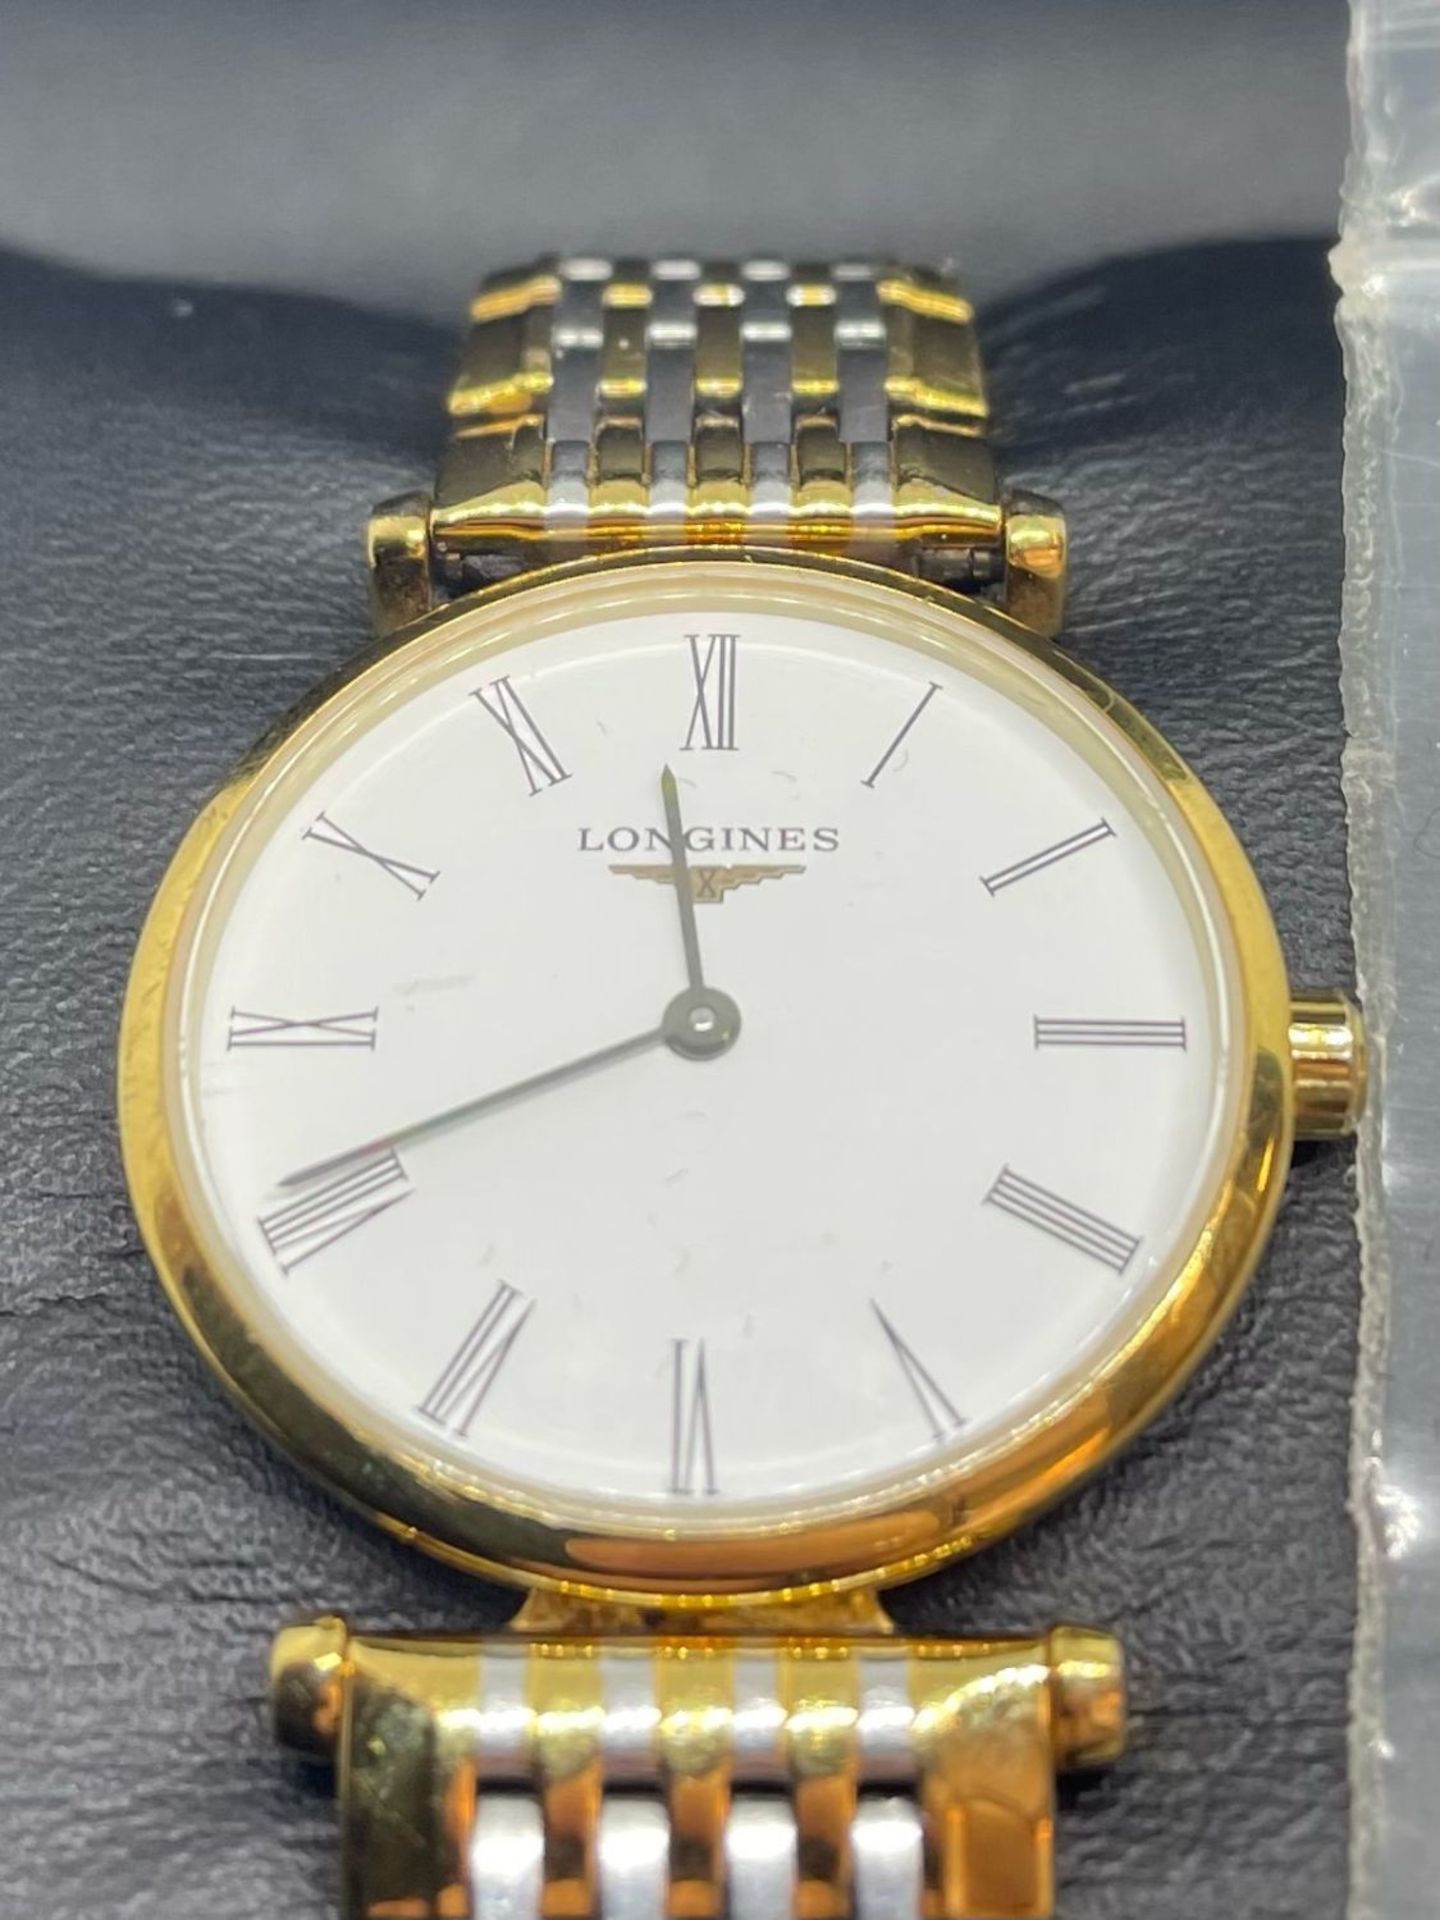 Longines “ Le Grand Classique” Gold plated and steel